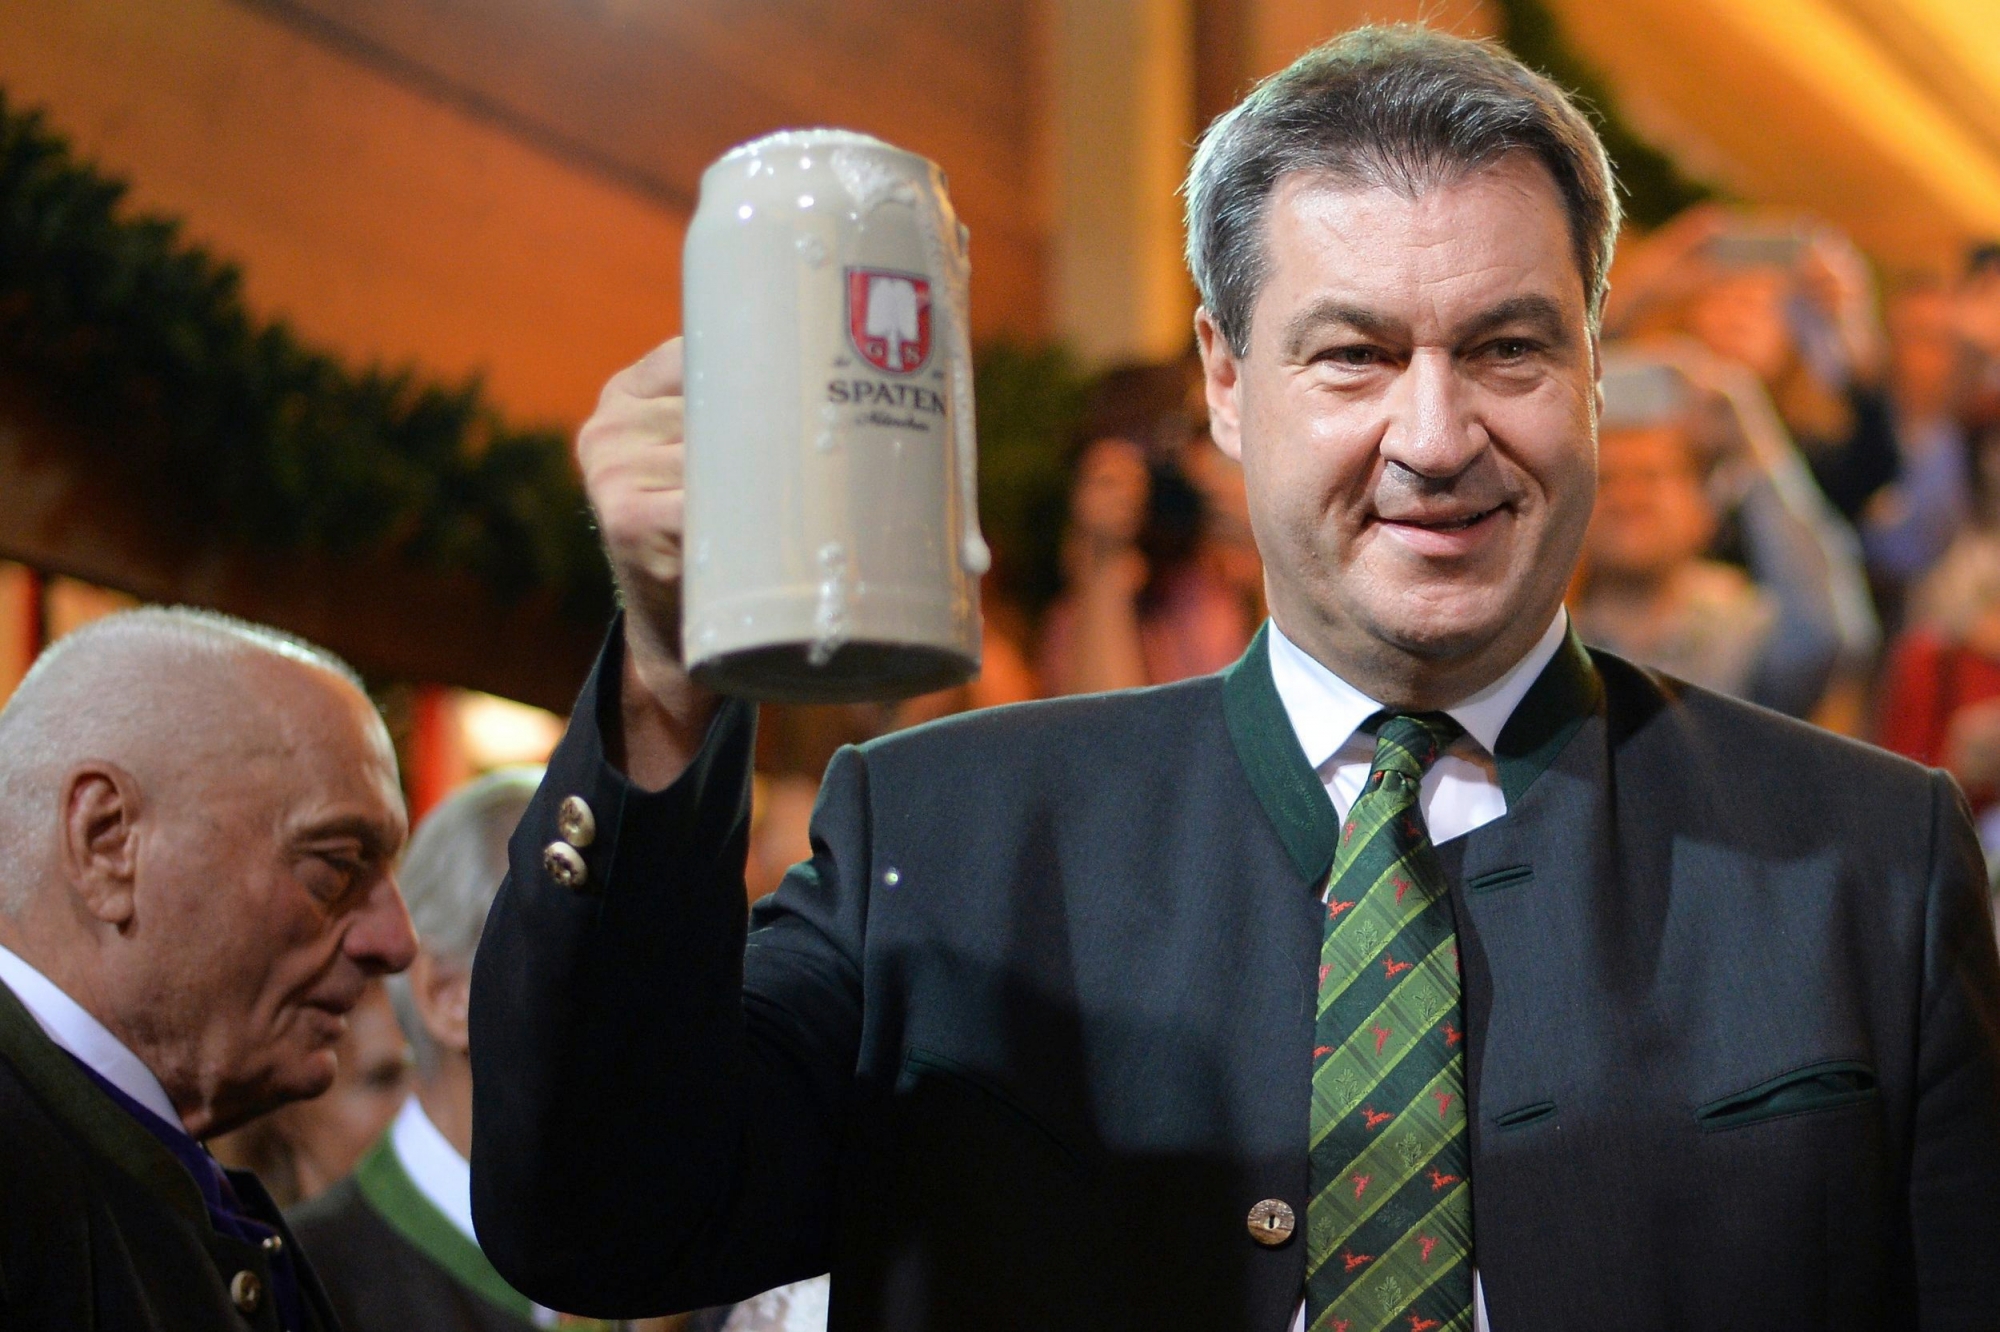 epa07038711 Bavarian prime minister Markus Soeder (CSU) toasts with a beer stein during the opening day of the 185th Oktoberfest beer festival in Munich, Germany, 22 September 2018. The Munich Beer Festival is the world's largest traditional beer festival and runs from 22 September to 07 October.  EPA/PHILIPP GUELLAND GERMANY OKTOBERFEST